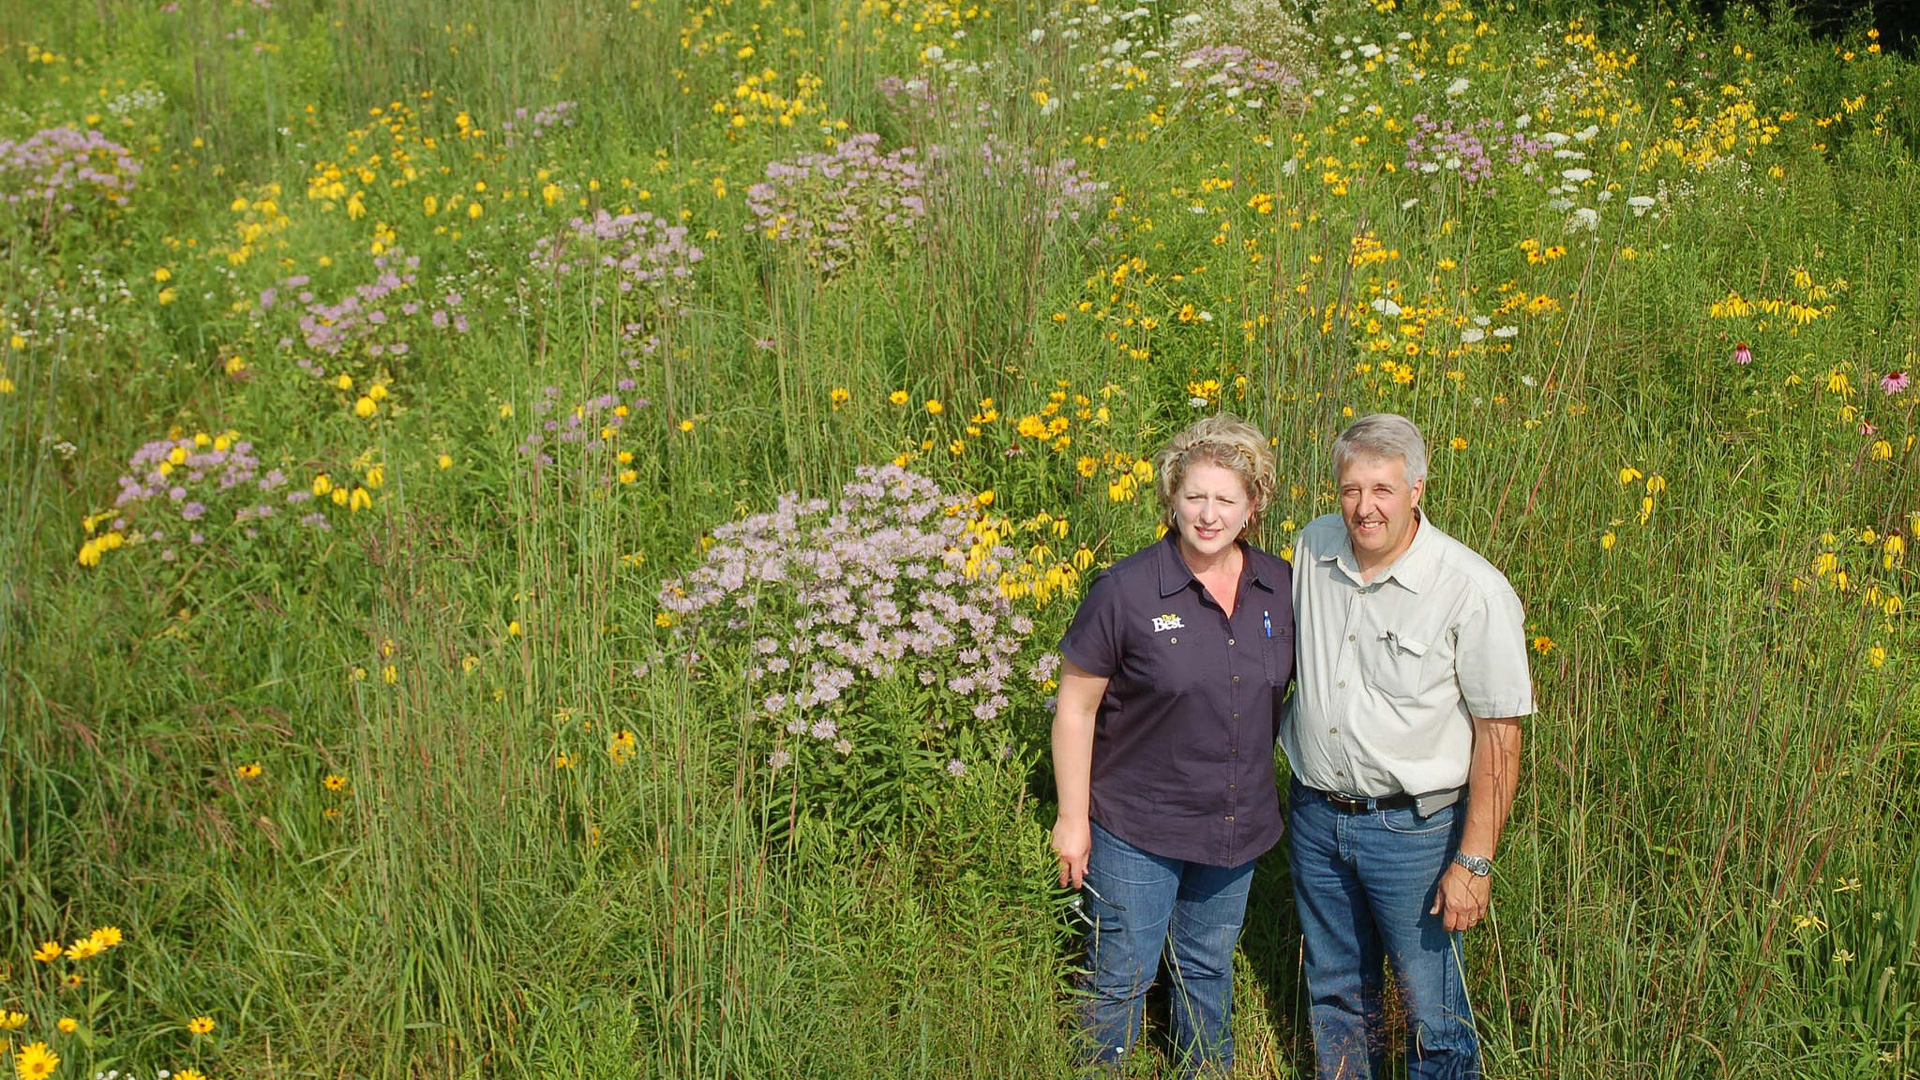 Paul and Becky Rogers converted 14 acres of land in Kent County Michigan to native pollinator habitat seven years ago through the U.S. Department of Agriculture’s (USDA) Farm Service Agency (FSA) State Acres for Wildlife Enhancement (SAFE) program. Photo © USDA / Flickr through a Creative Commons license 